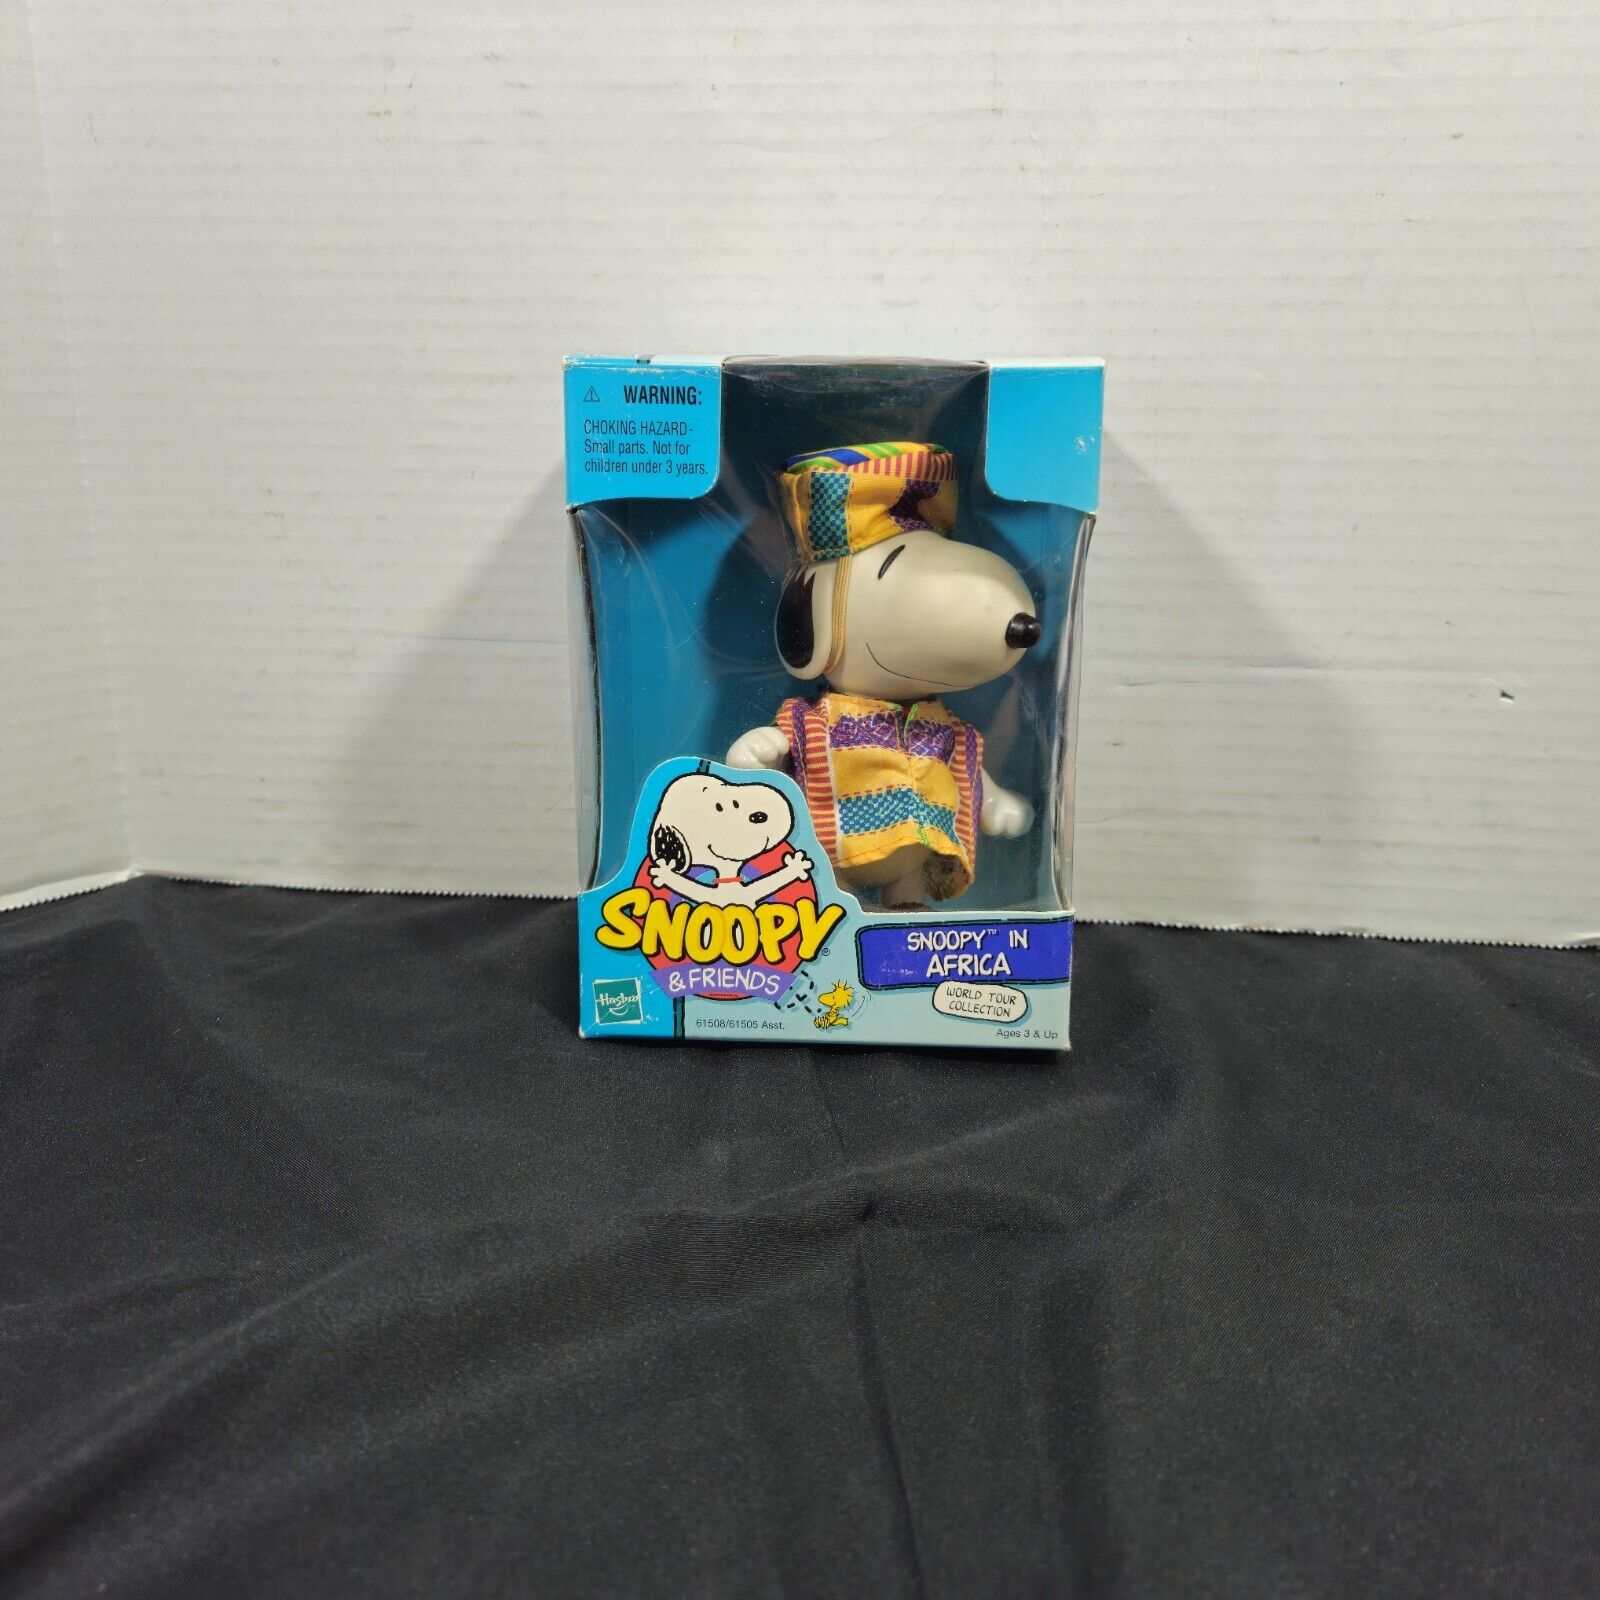 Snoopy and Friends Snoopy in Africa World Tour Toy Figure Collection Hasbro New